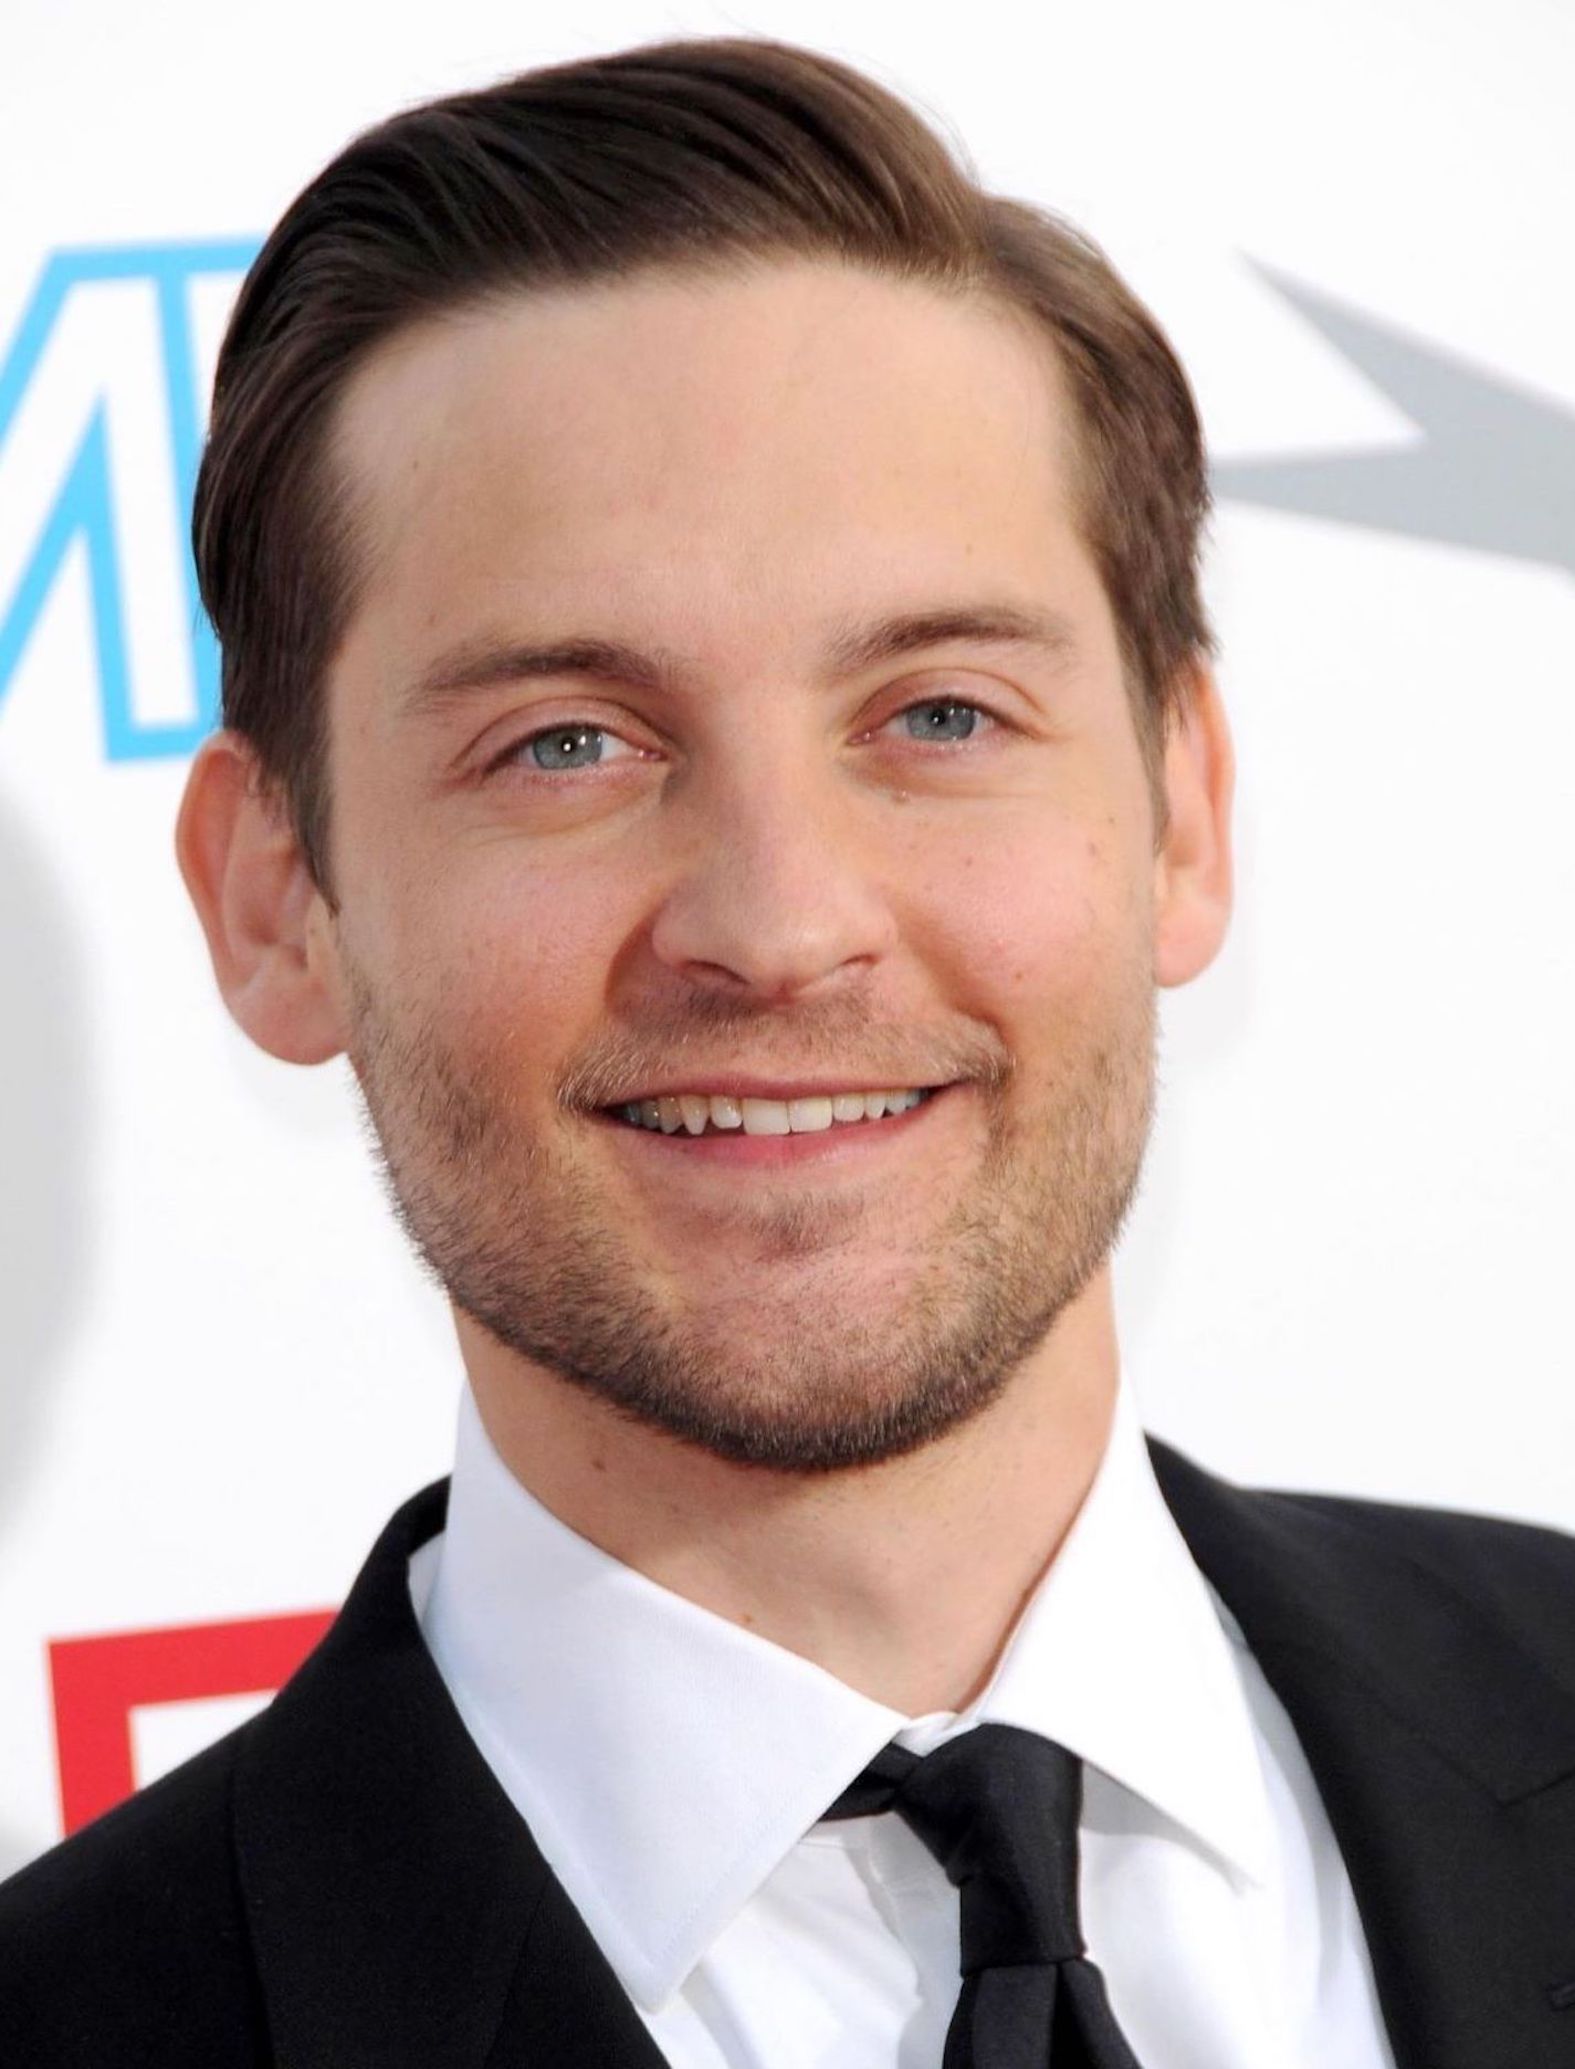 Toby Maguire